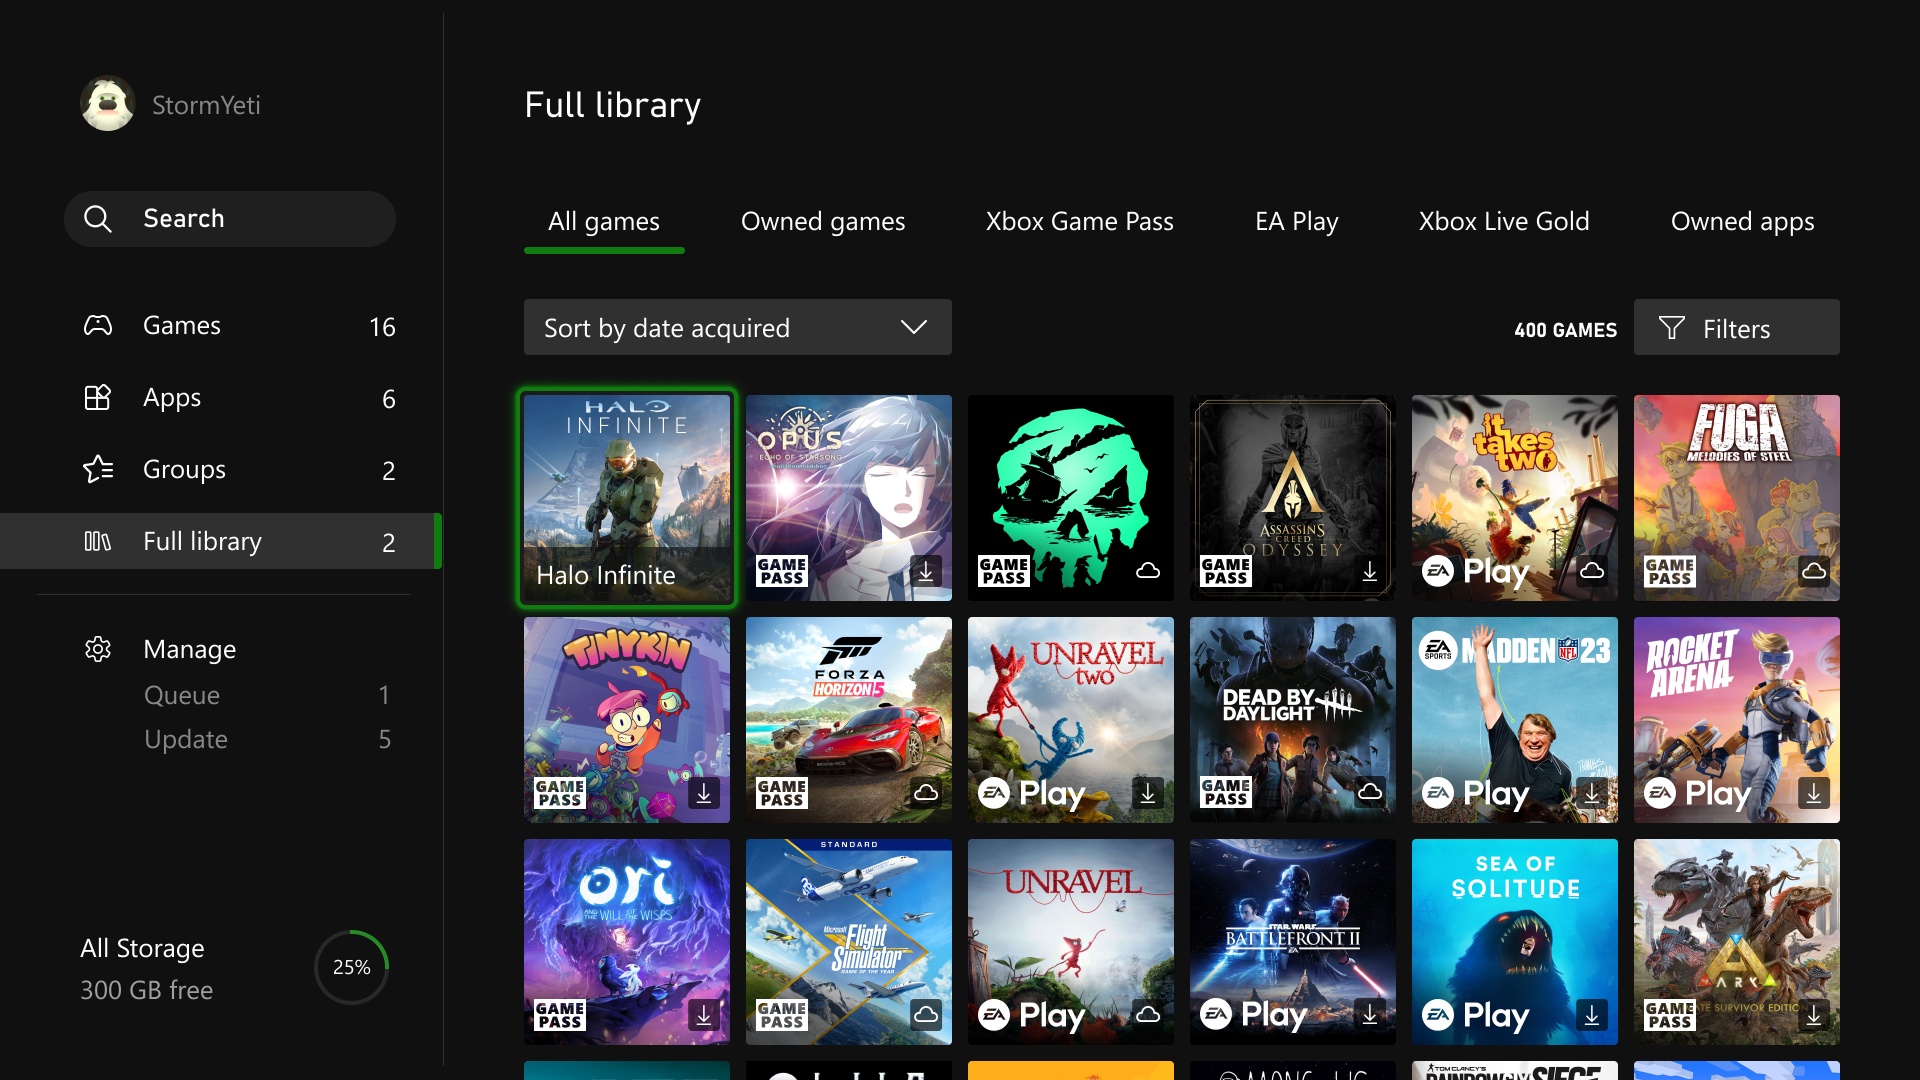 The full library view on an Xbox console